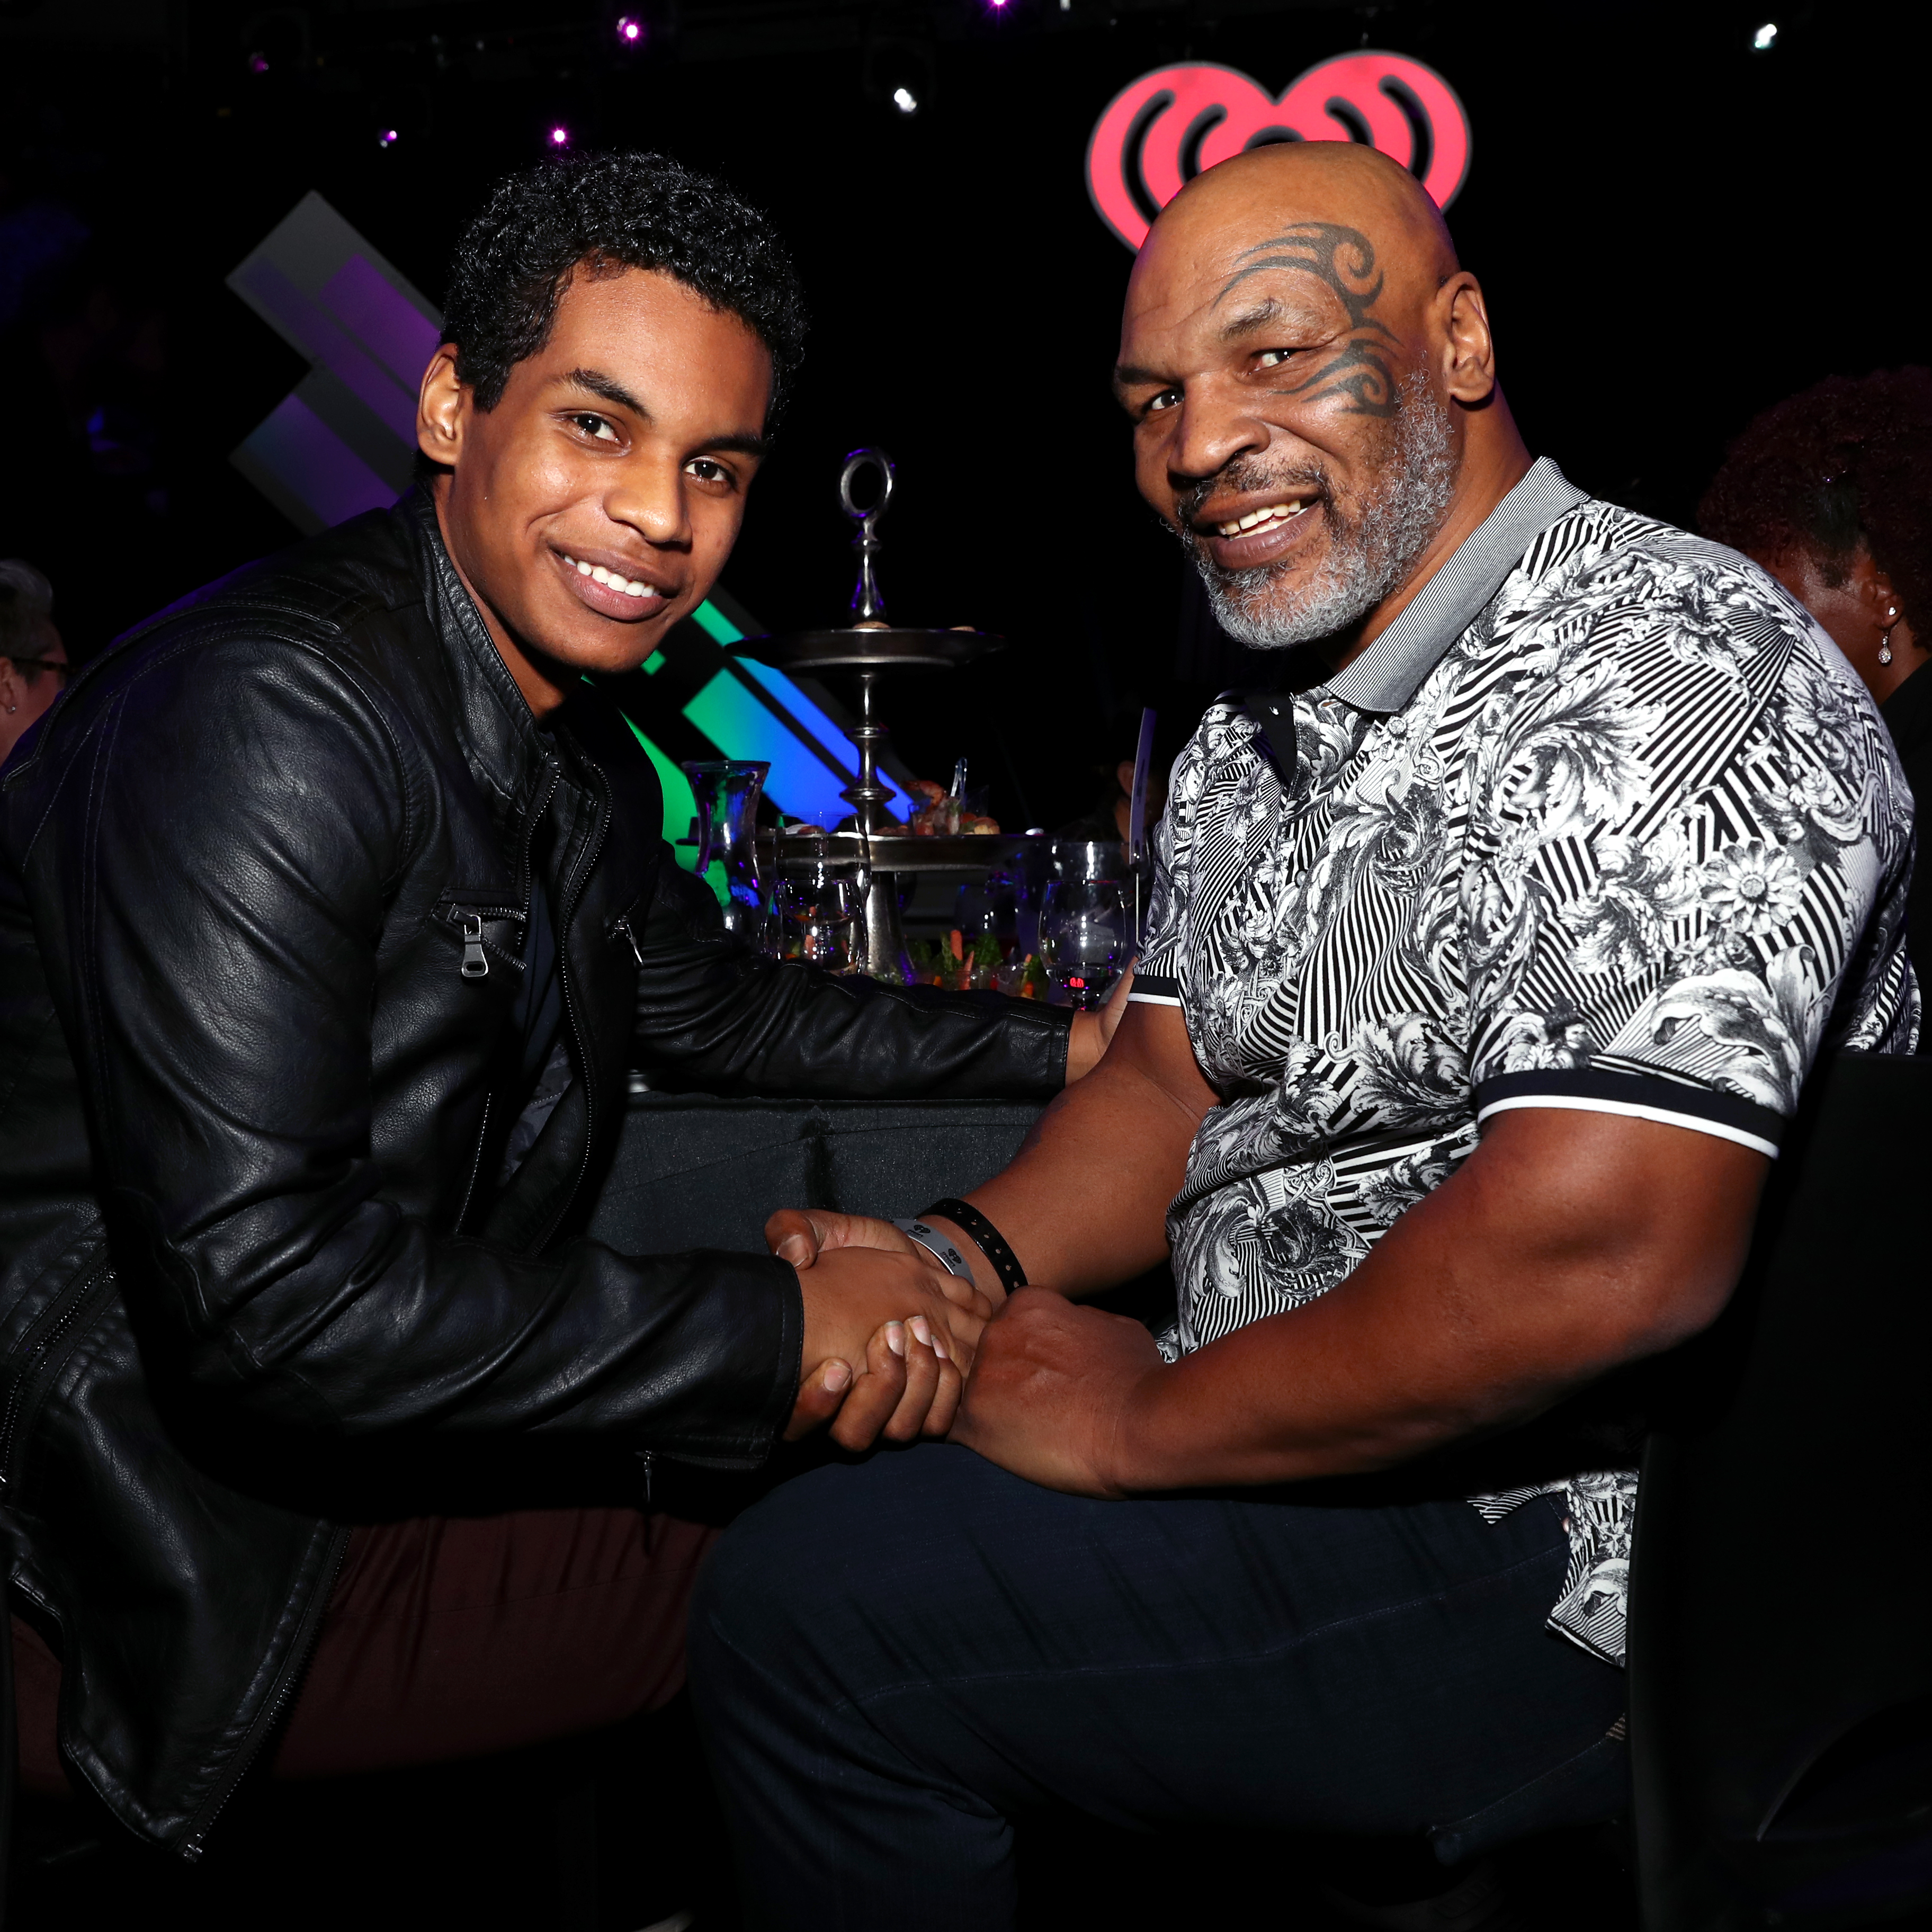 Miguel Leon Tyson and Mike Tyson at the 2019 iHeartRadio Podcast Awards at the iHeartRadio Theater LA on January 18, 2019, in Burbank, California. | Source: Getty Images